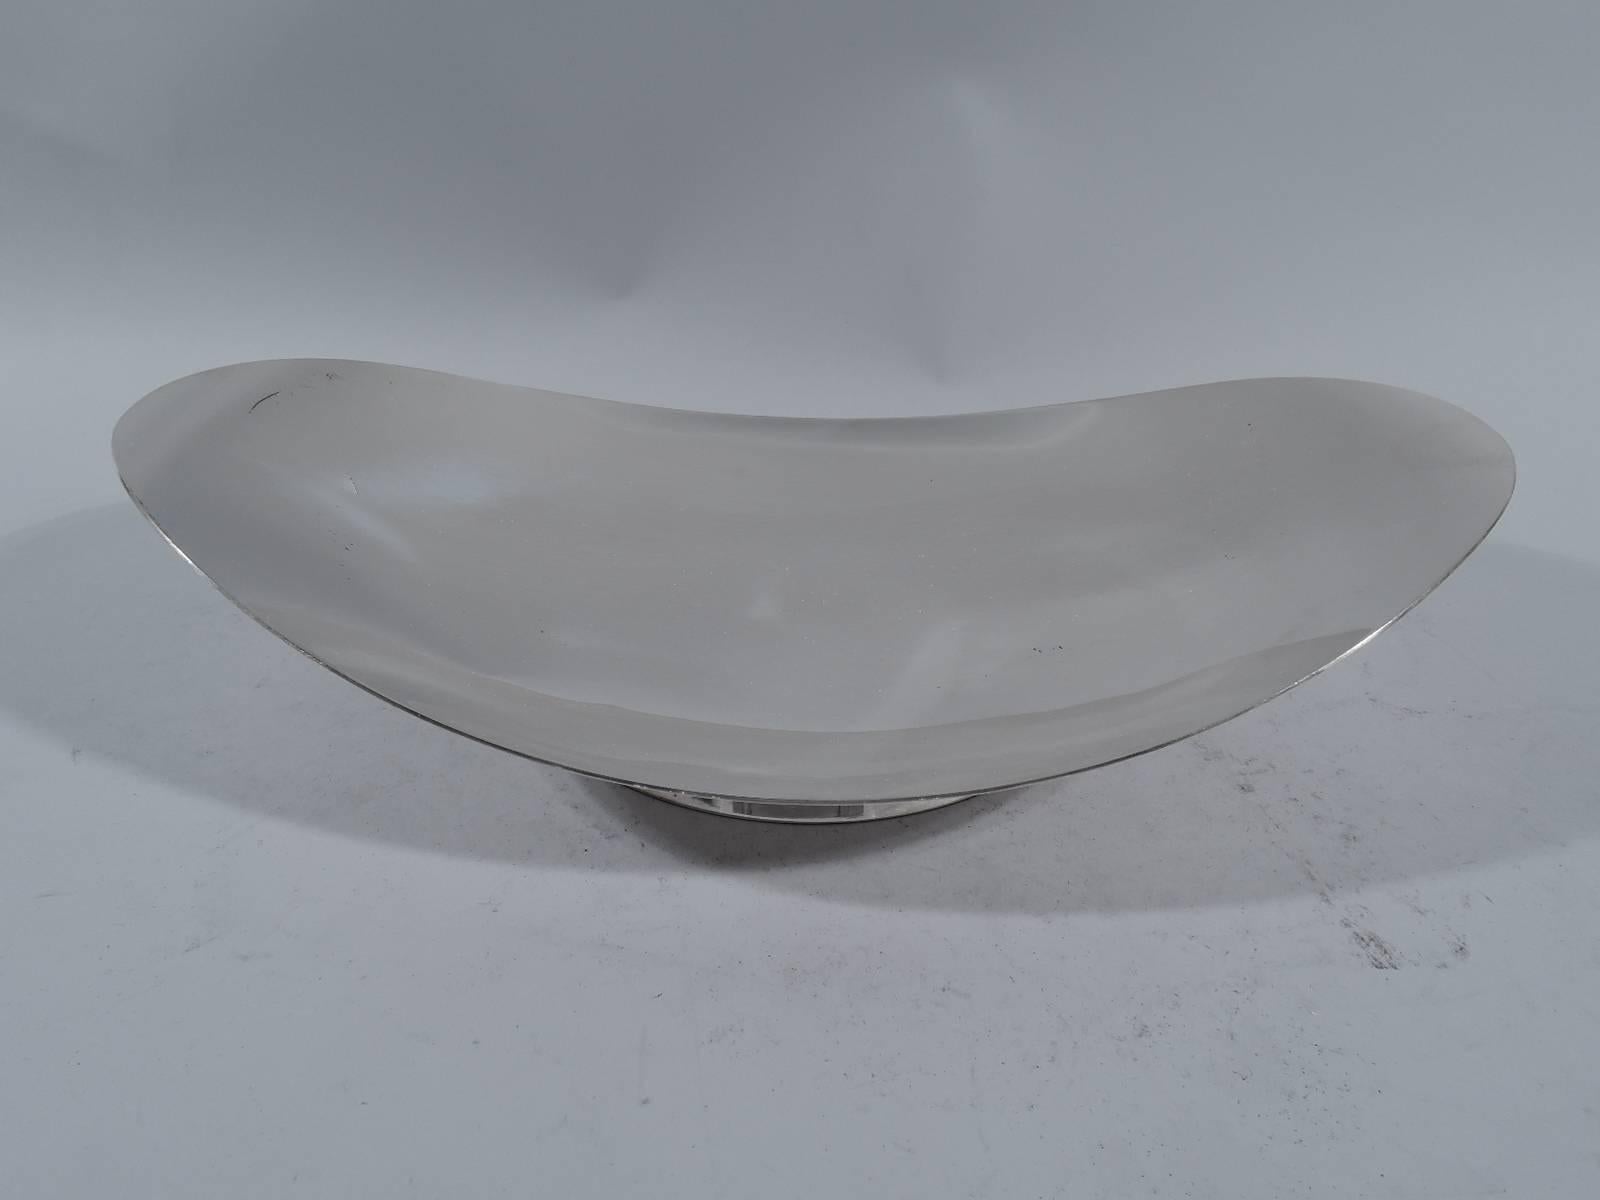 Modern sterling silver bowl. Made by Tiffany & Co. in New York, circa 1937. Shallow oval bowl on short circular foot. Hallmark includes pattern no. 22416 (first produced in 1937). Heavy weight: 23.8 troy ounces.